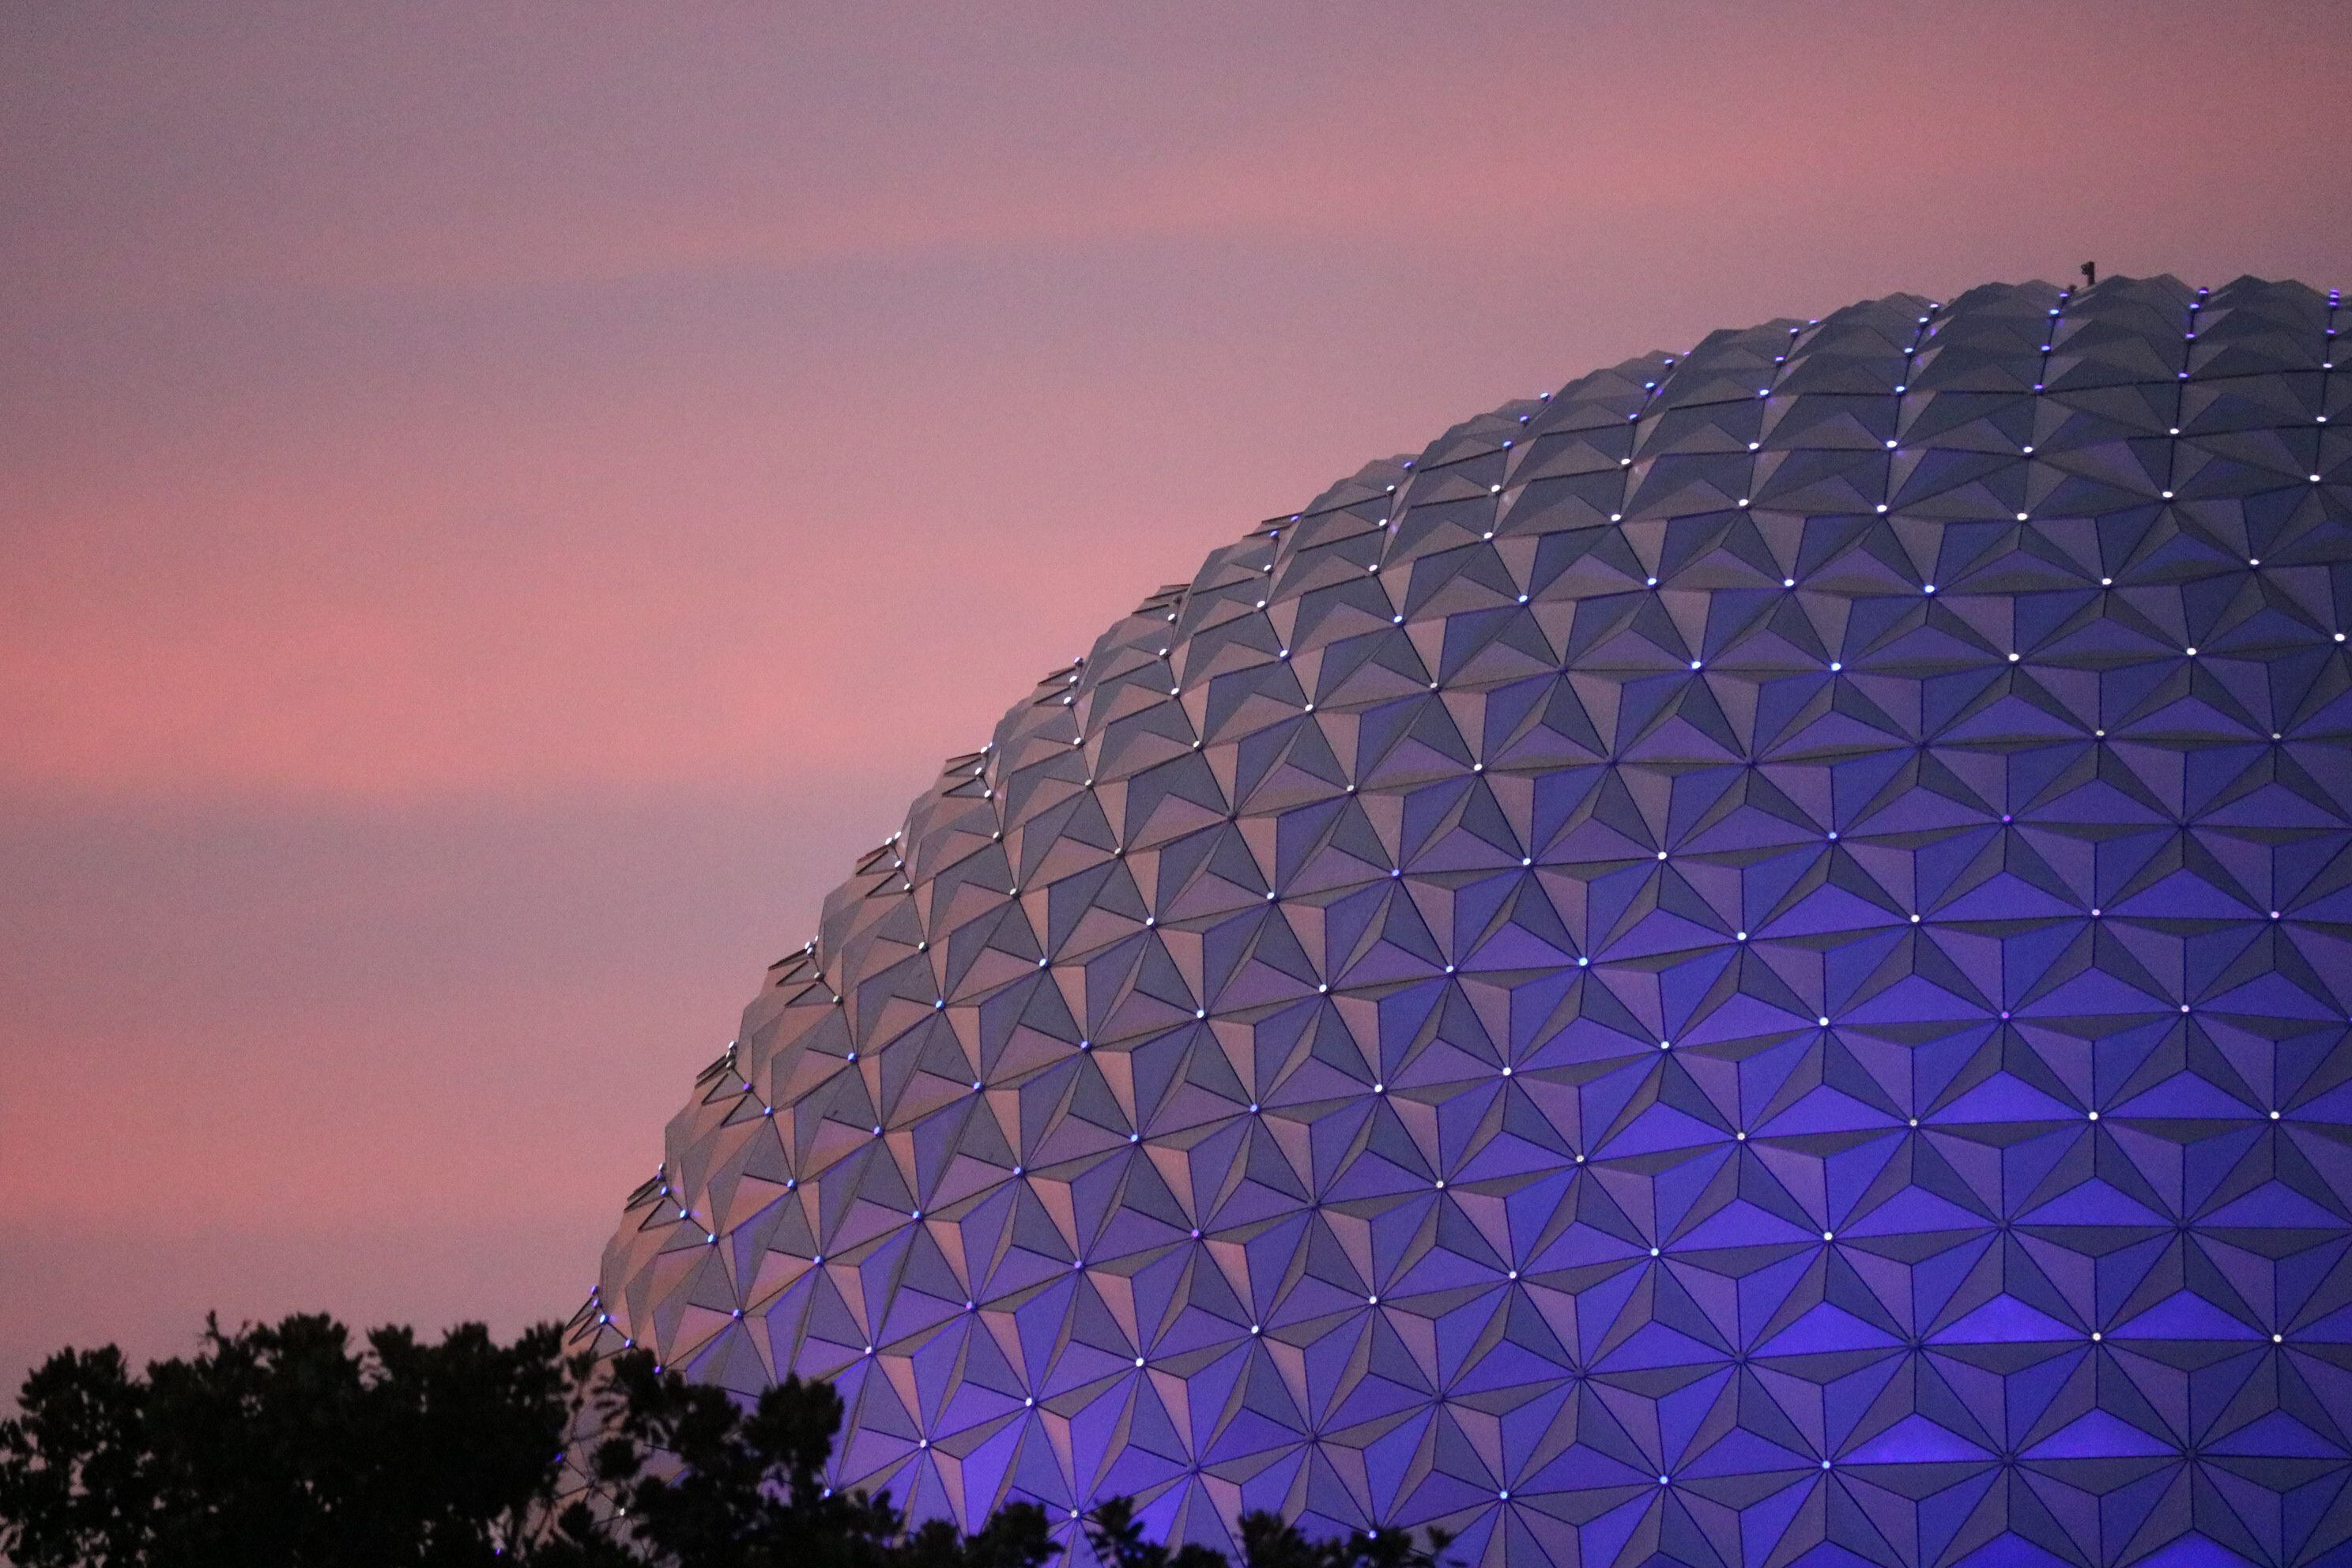 EPCOT attractions you may have forgotten about